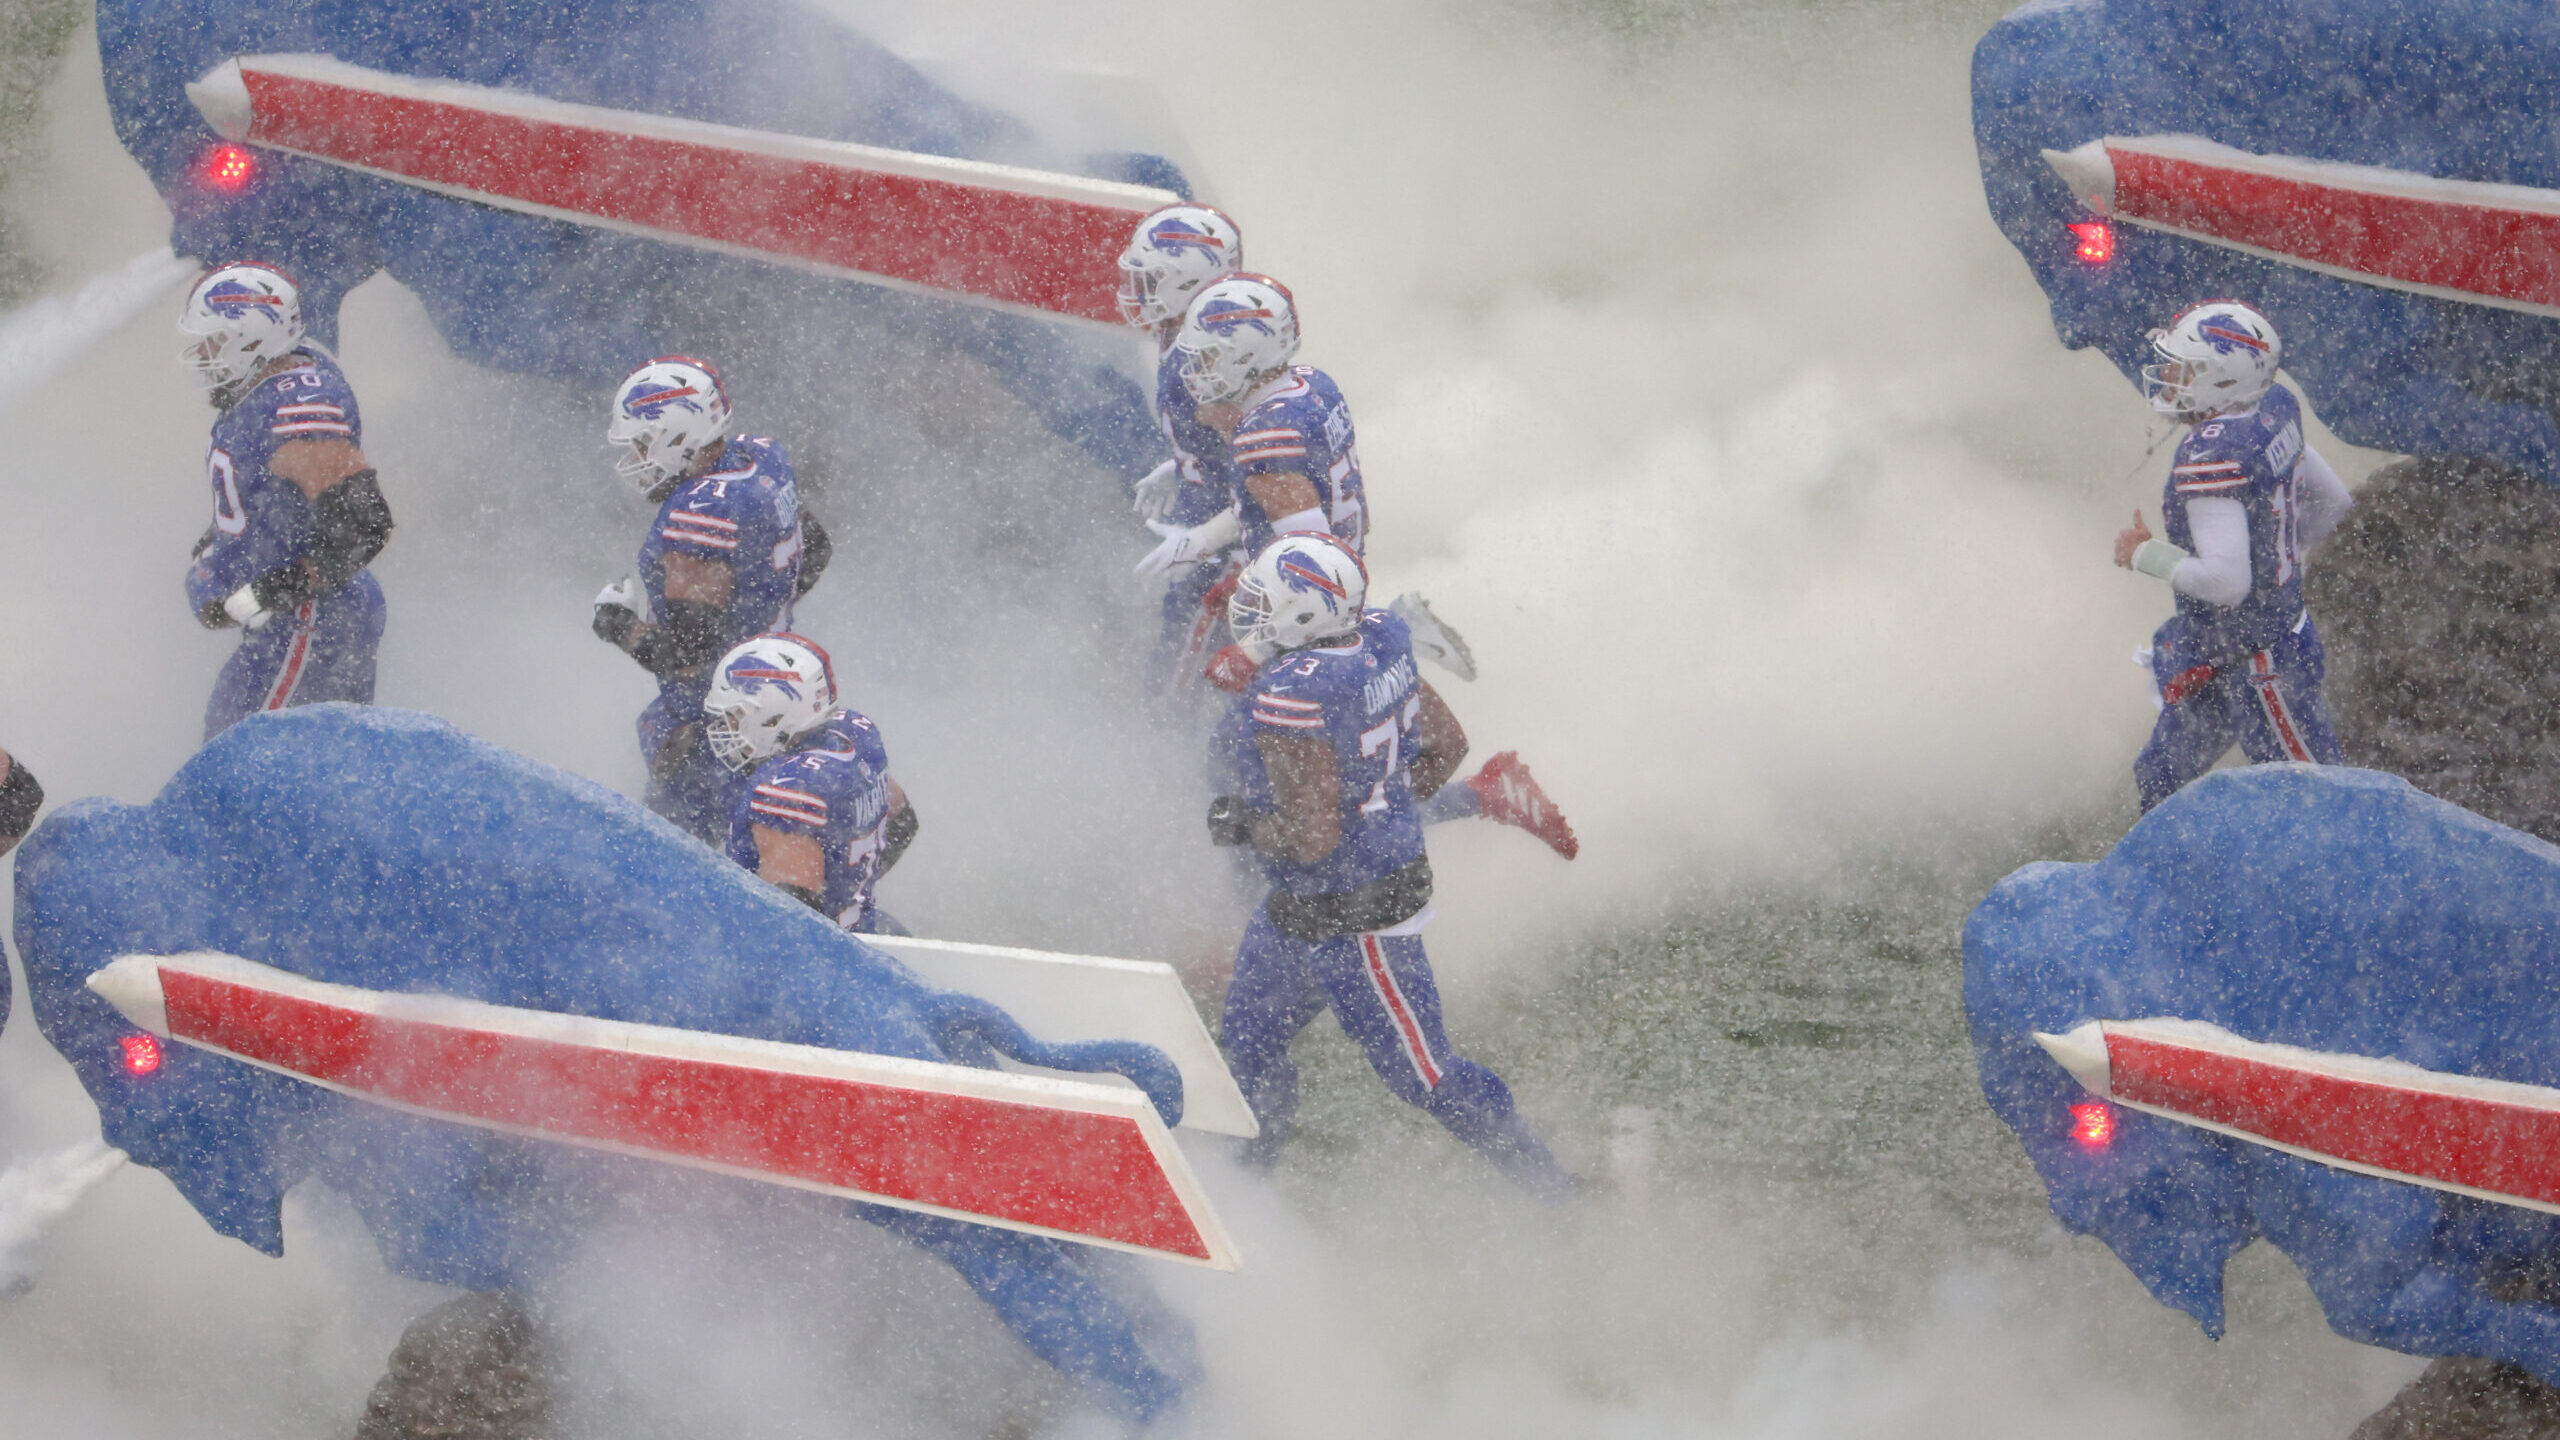 The Buffalo Bills take the field as snow falls in the AFC Divisional Playoff game against the Cinci...